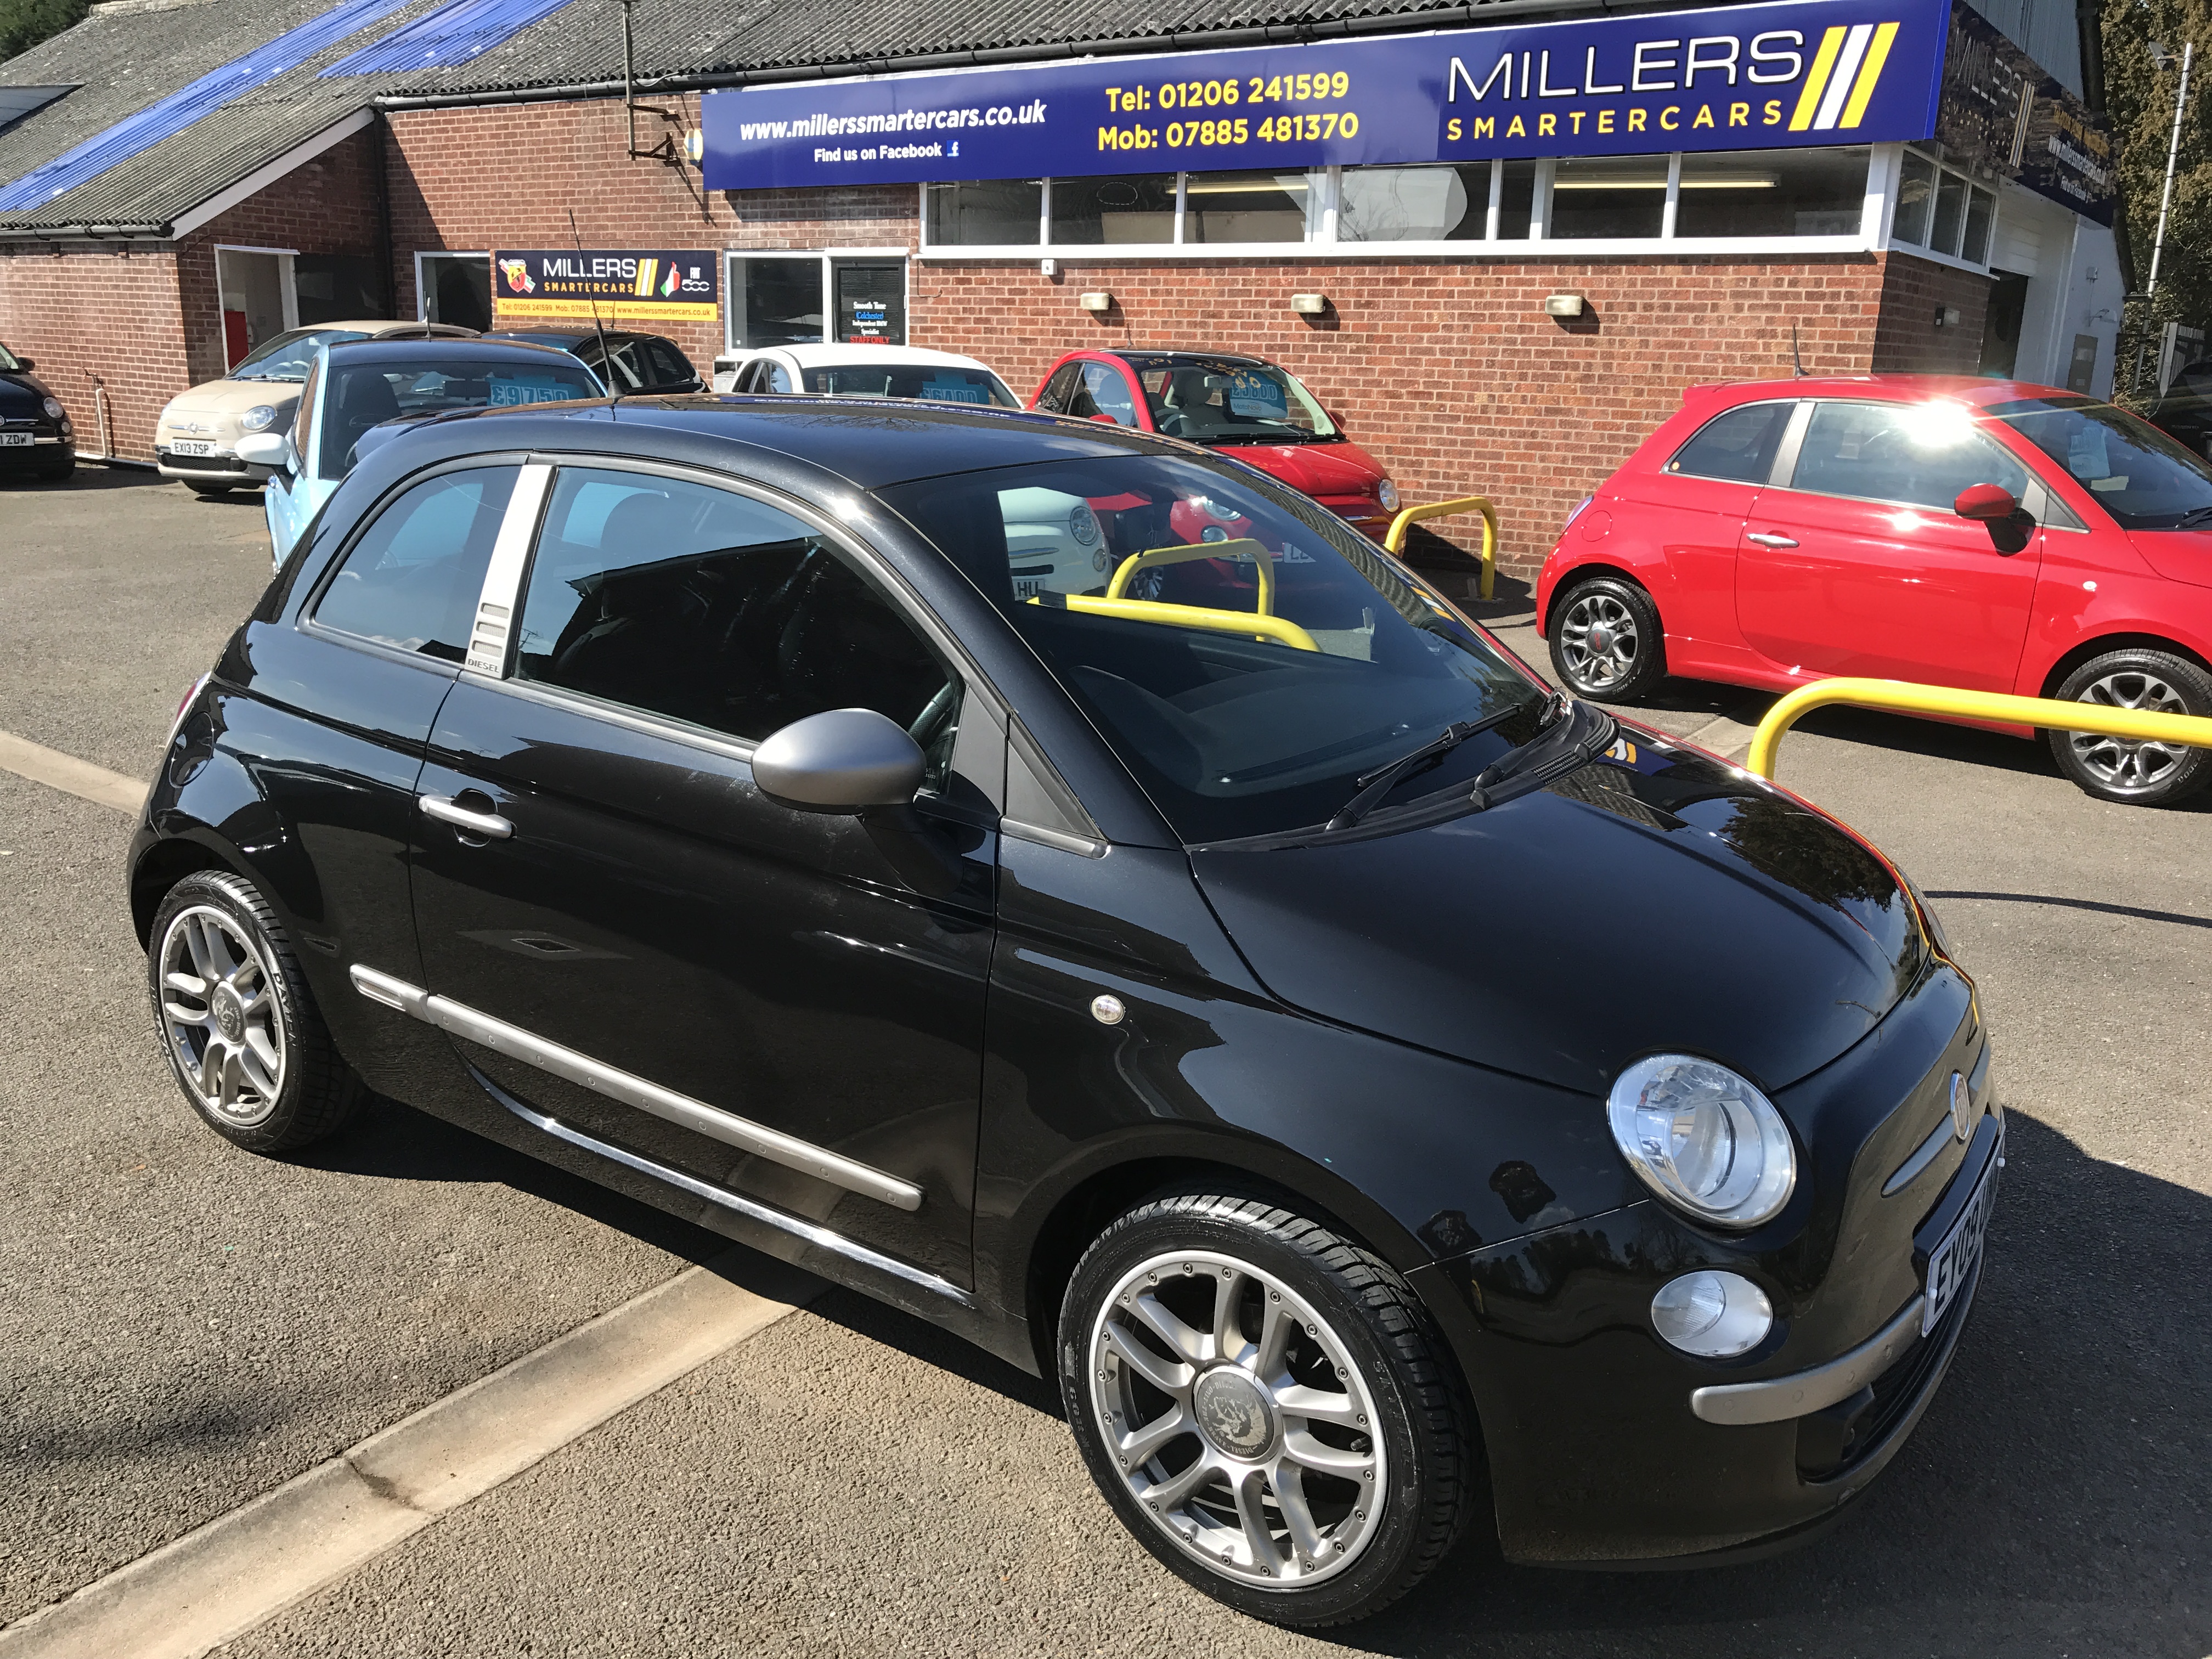 Fiat 500 By Diesel £85 a month with £500 deposit Millers